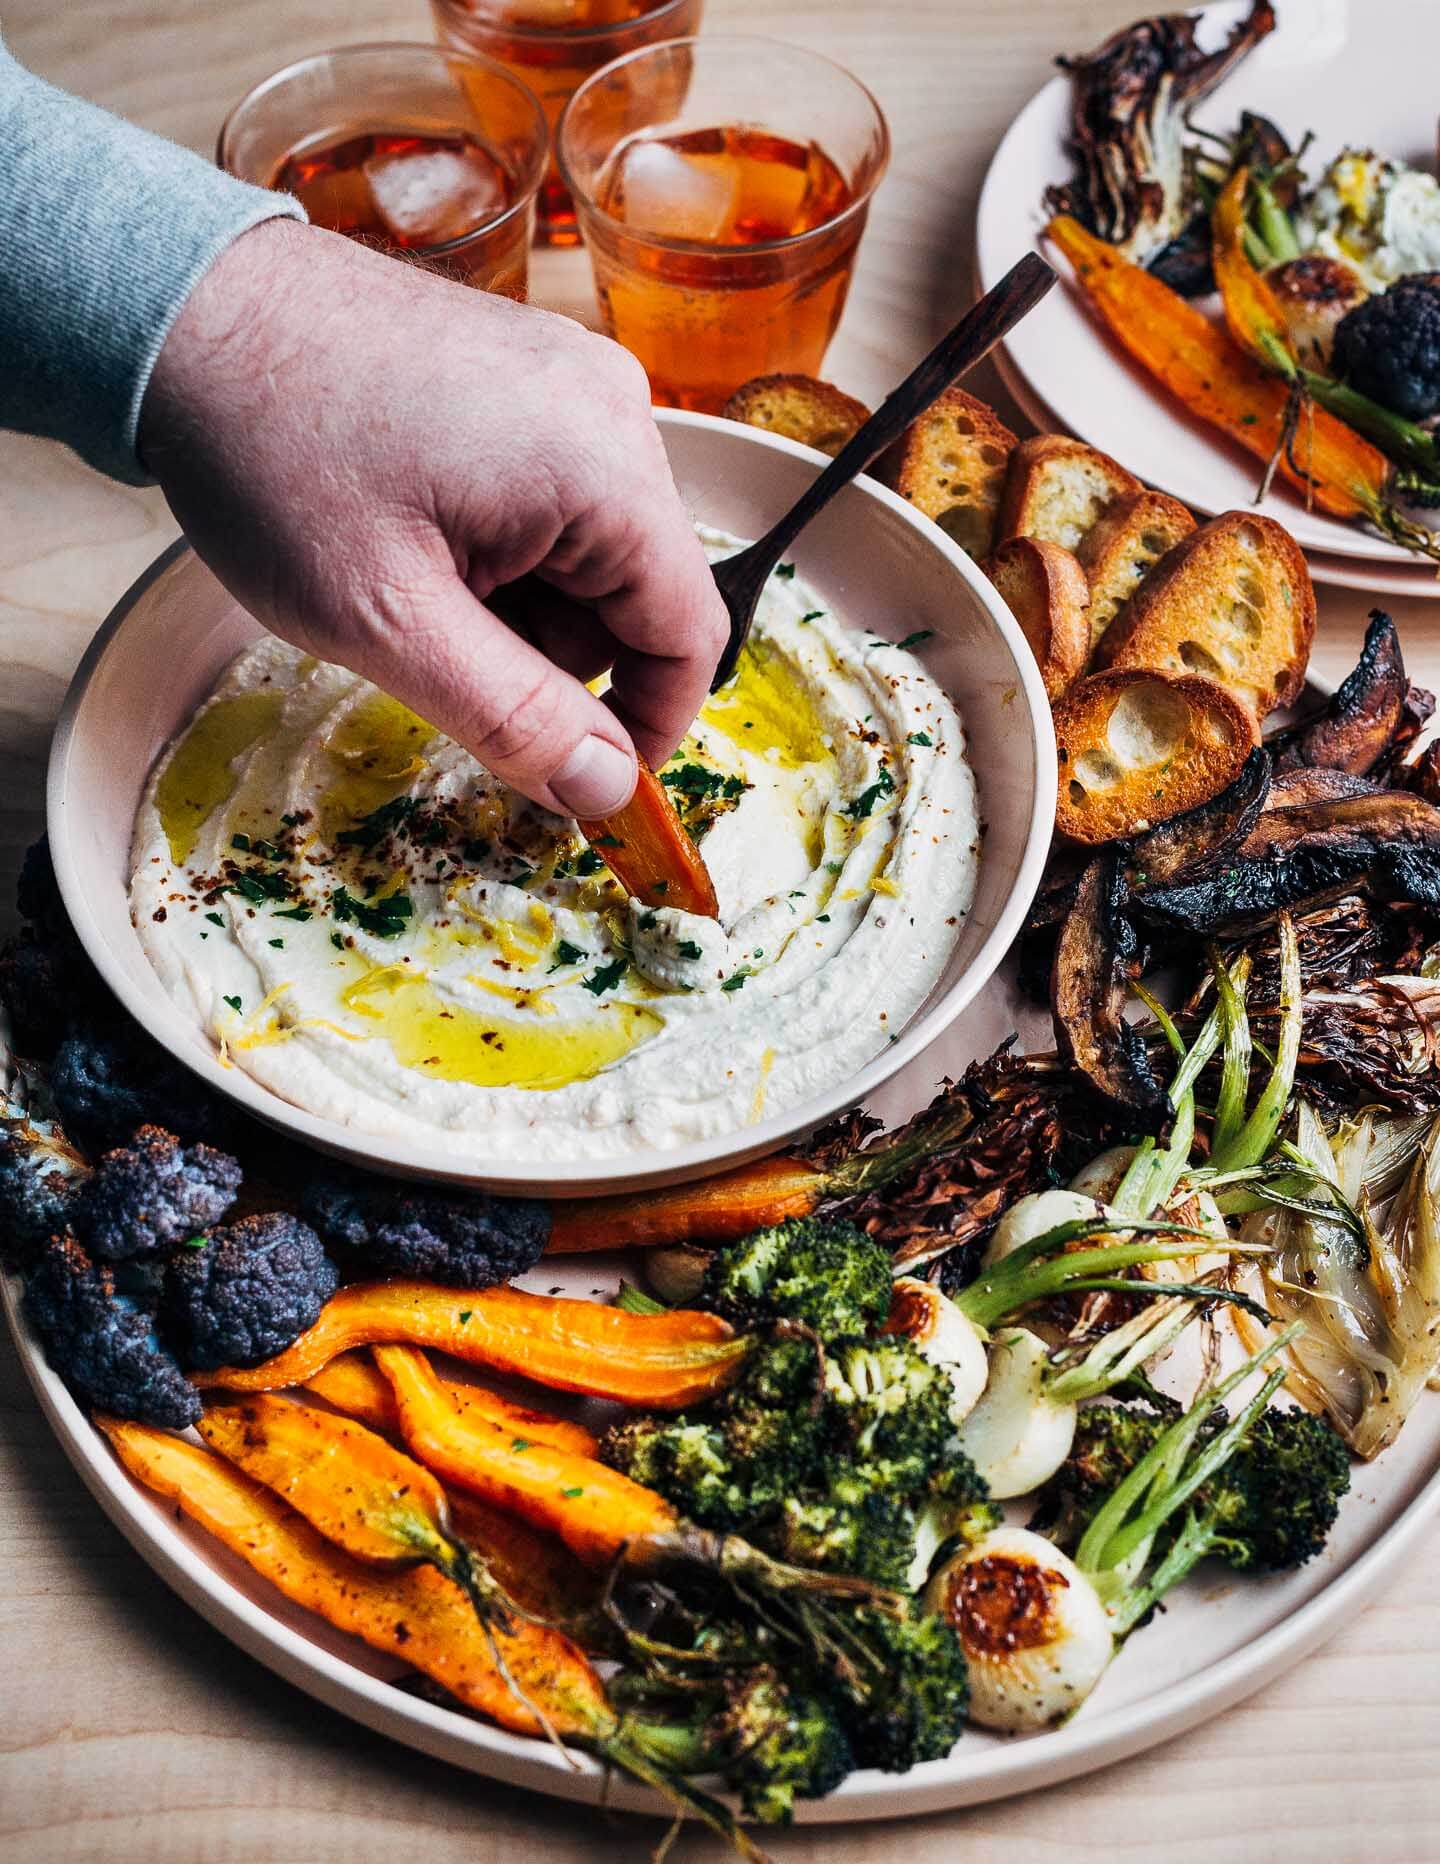 A hand dipping a carrot into whipped feta dip